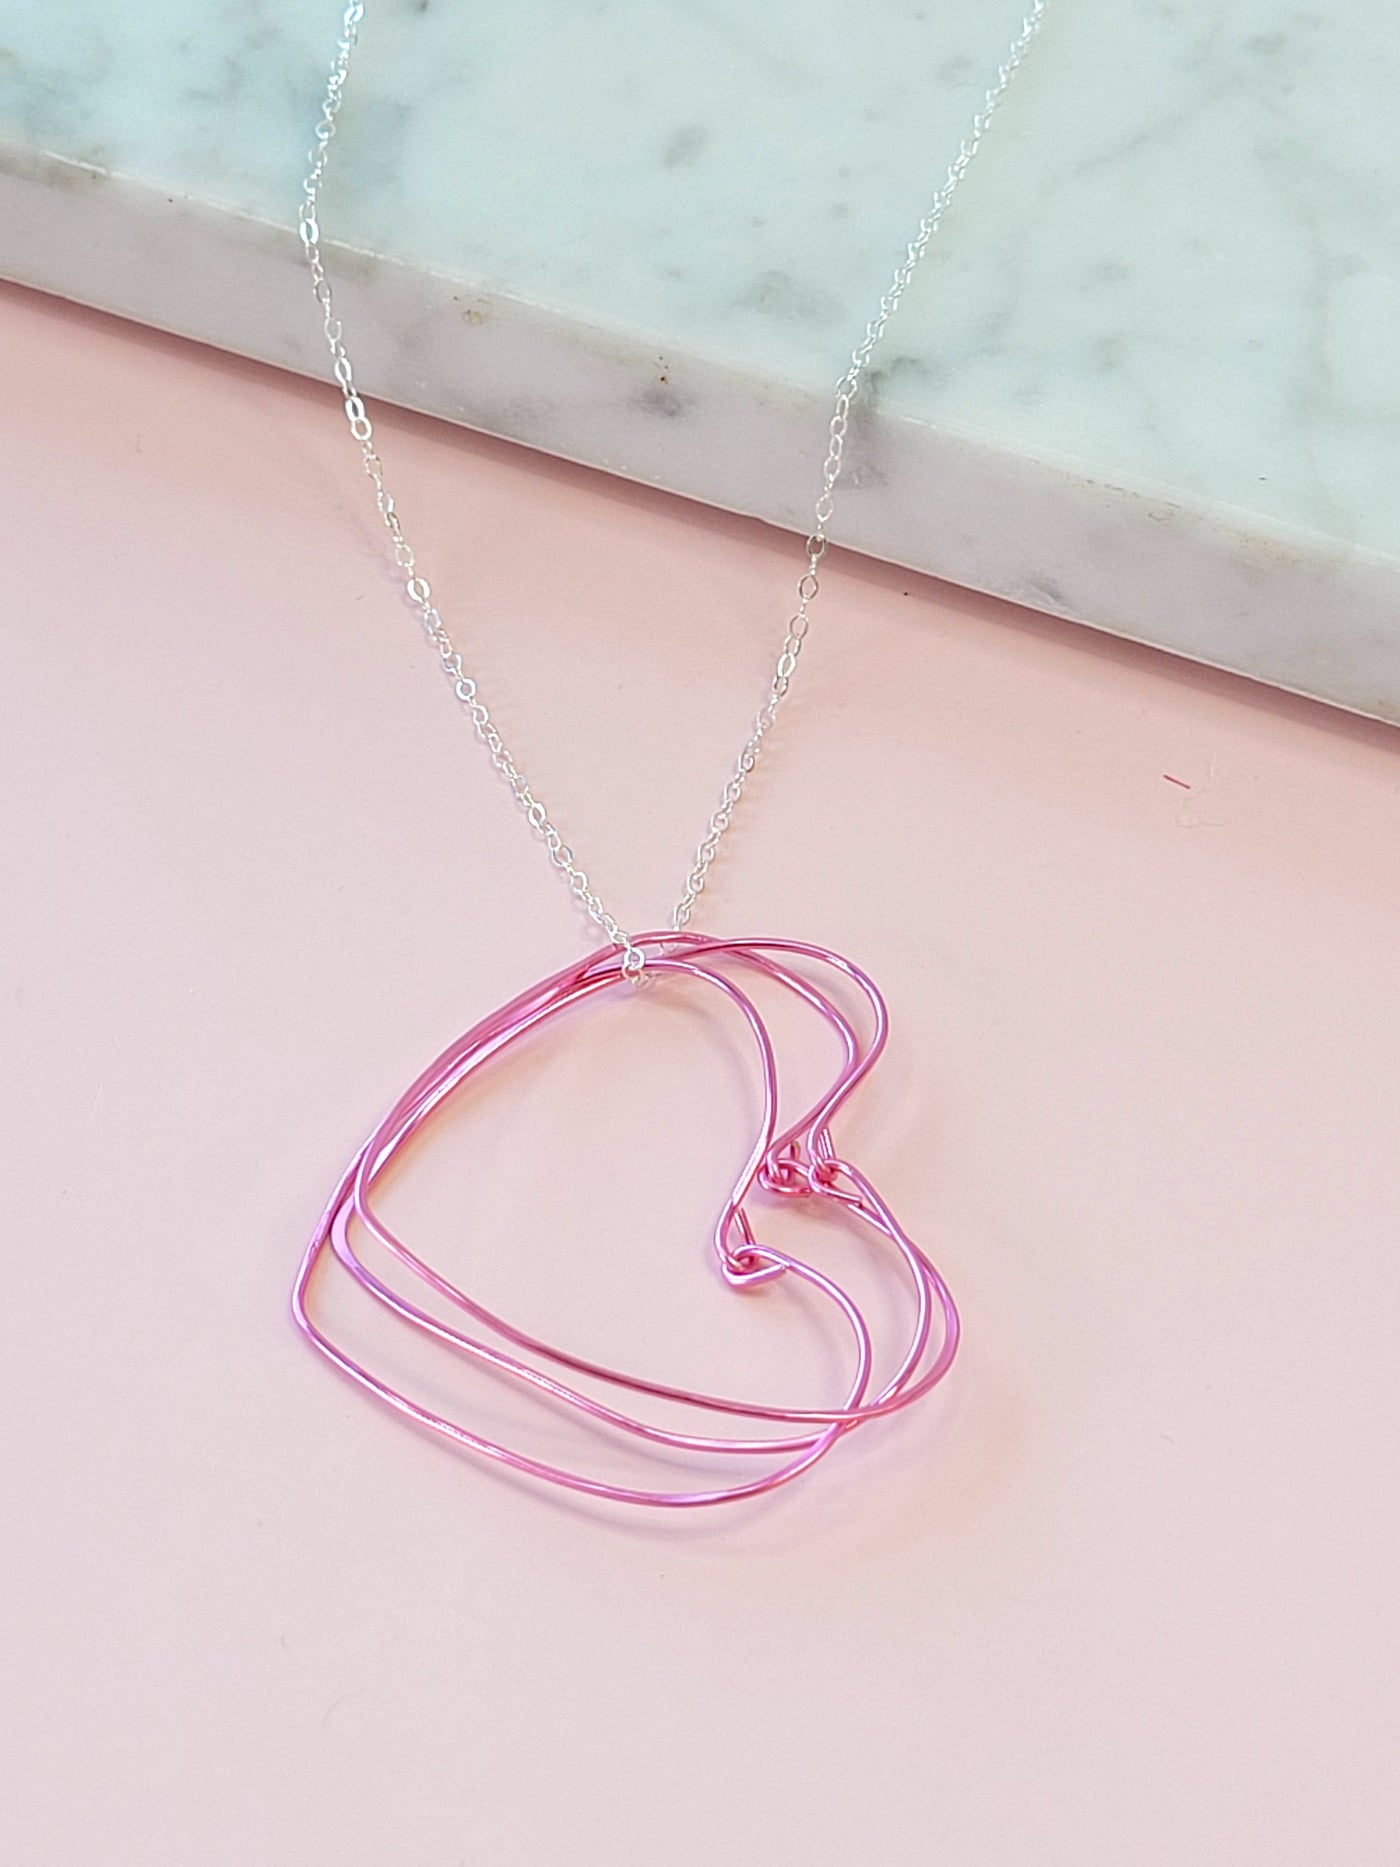 Hot Pink Hearts Necklace on a Silver Chain